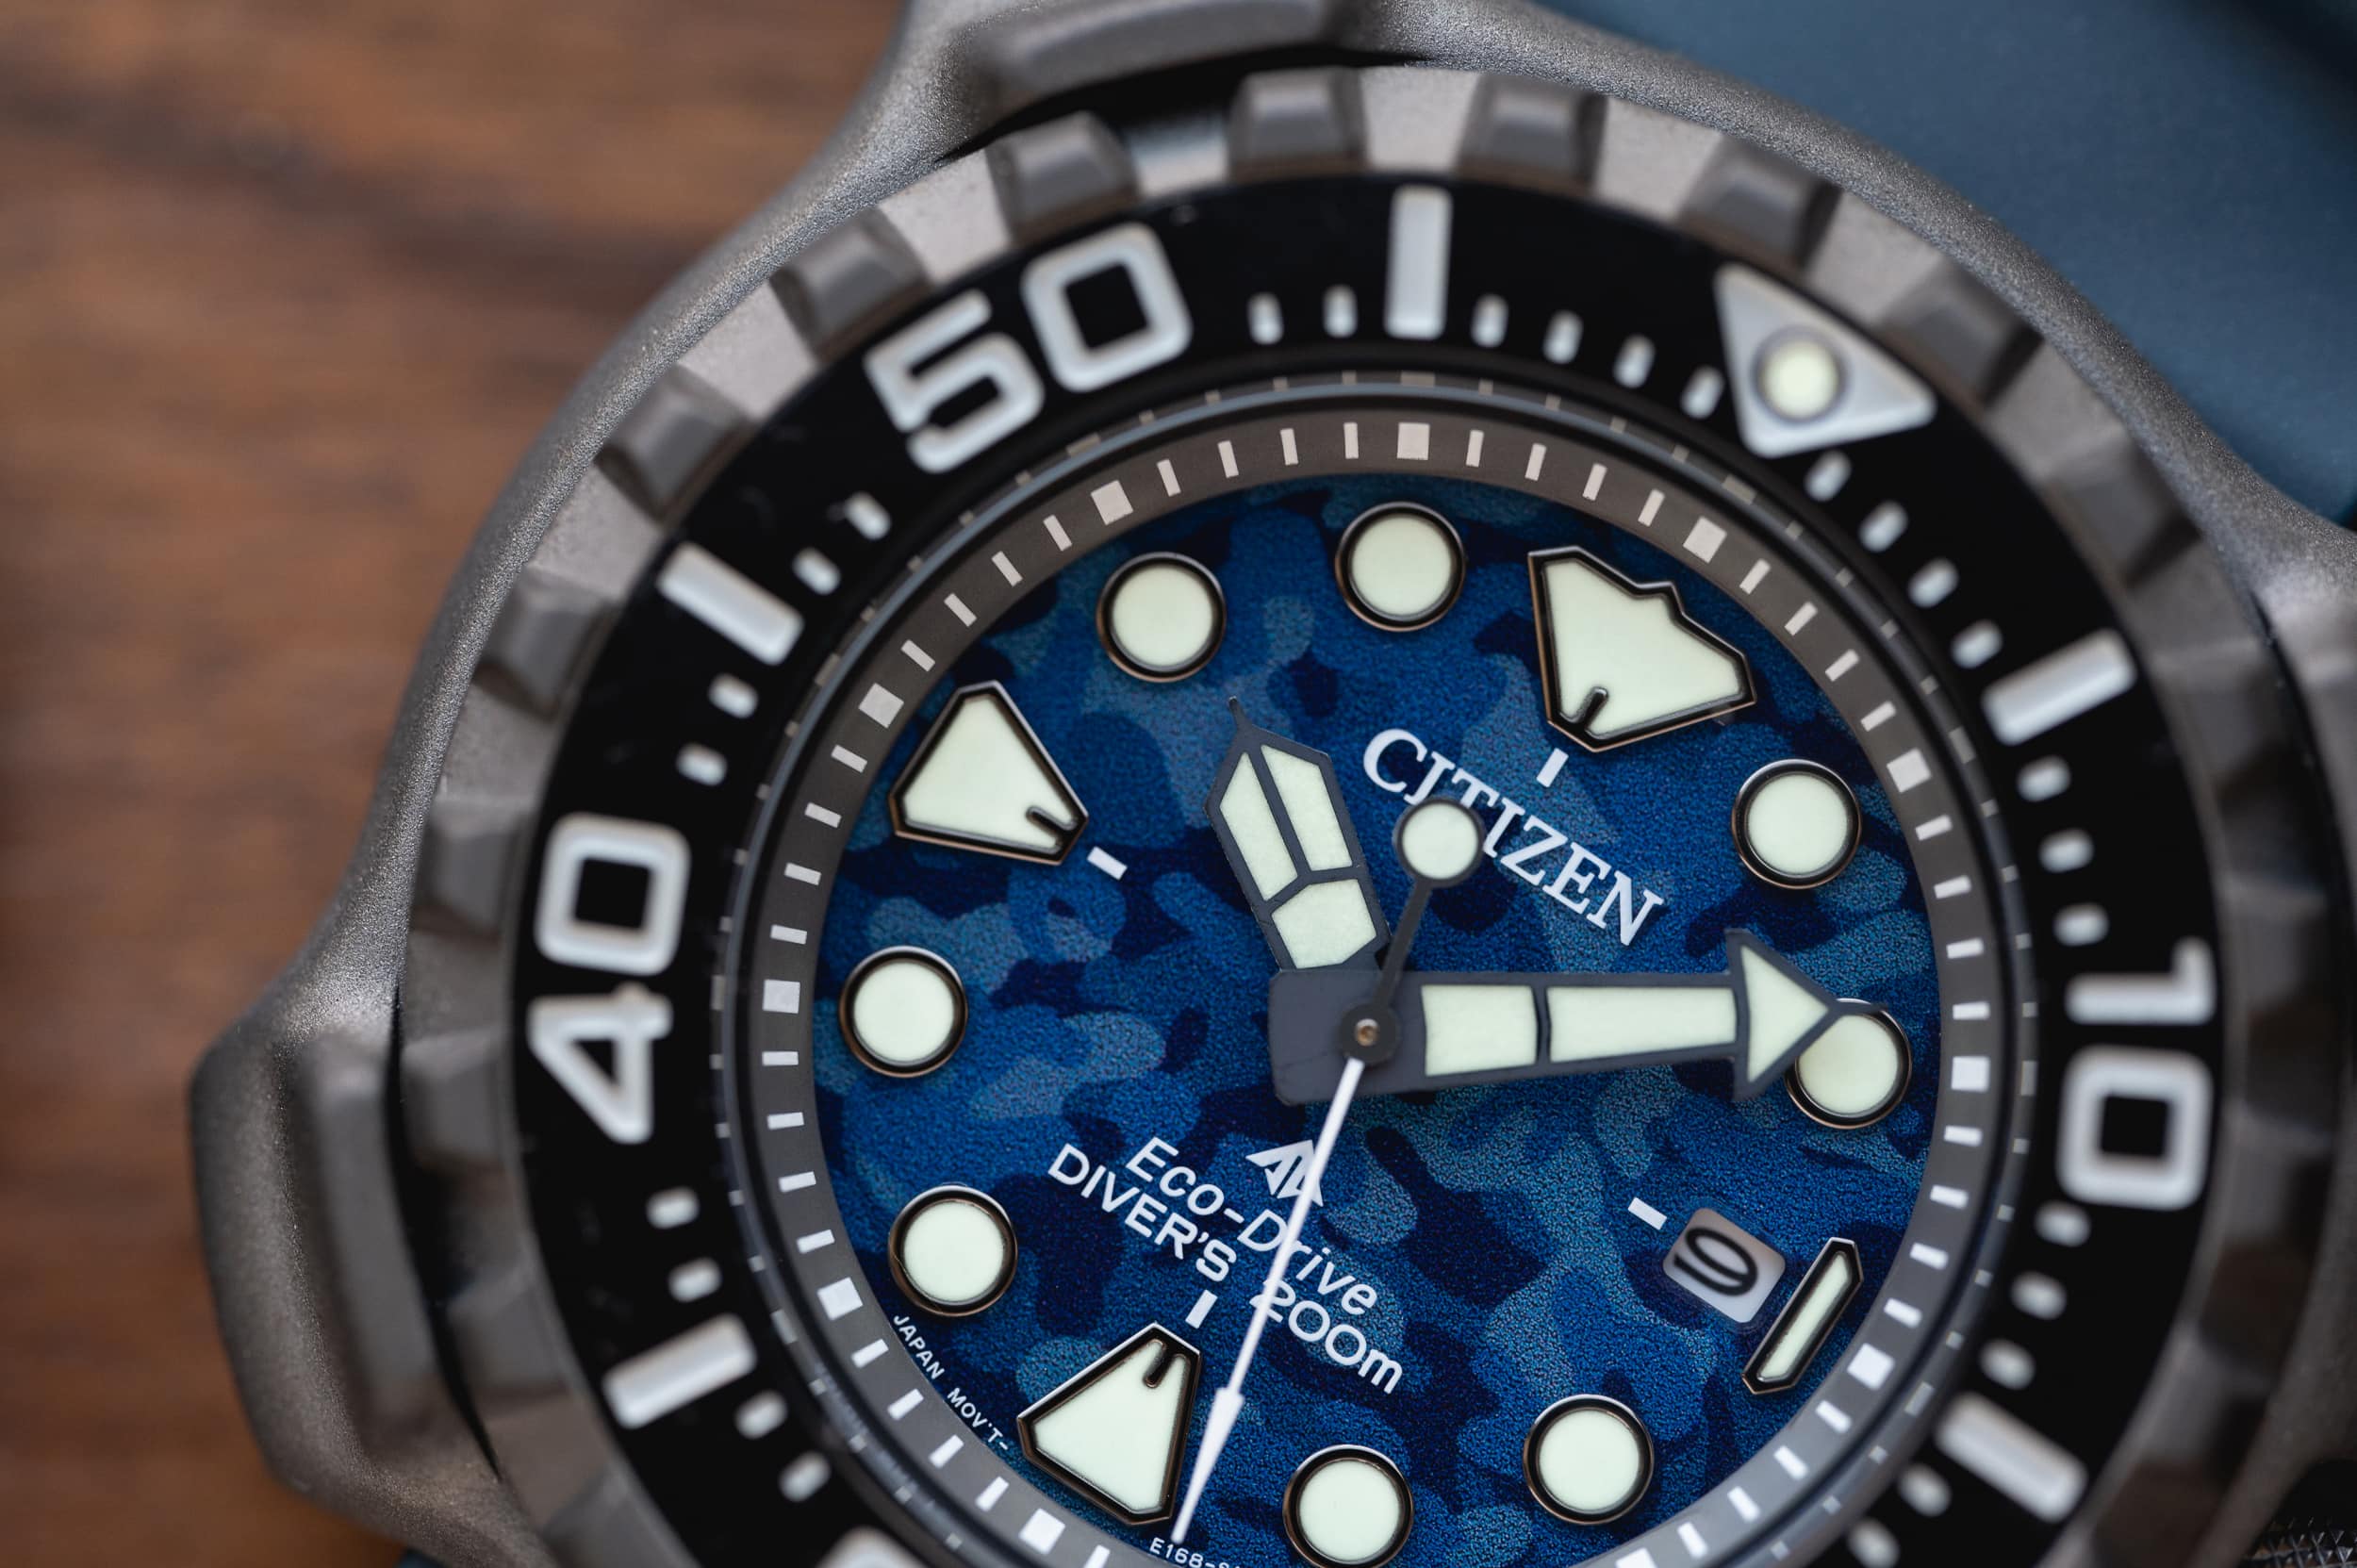 Review: The Assertive Yet Approachable Citizen Promaster Diver